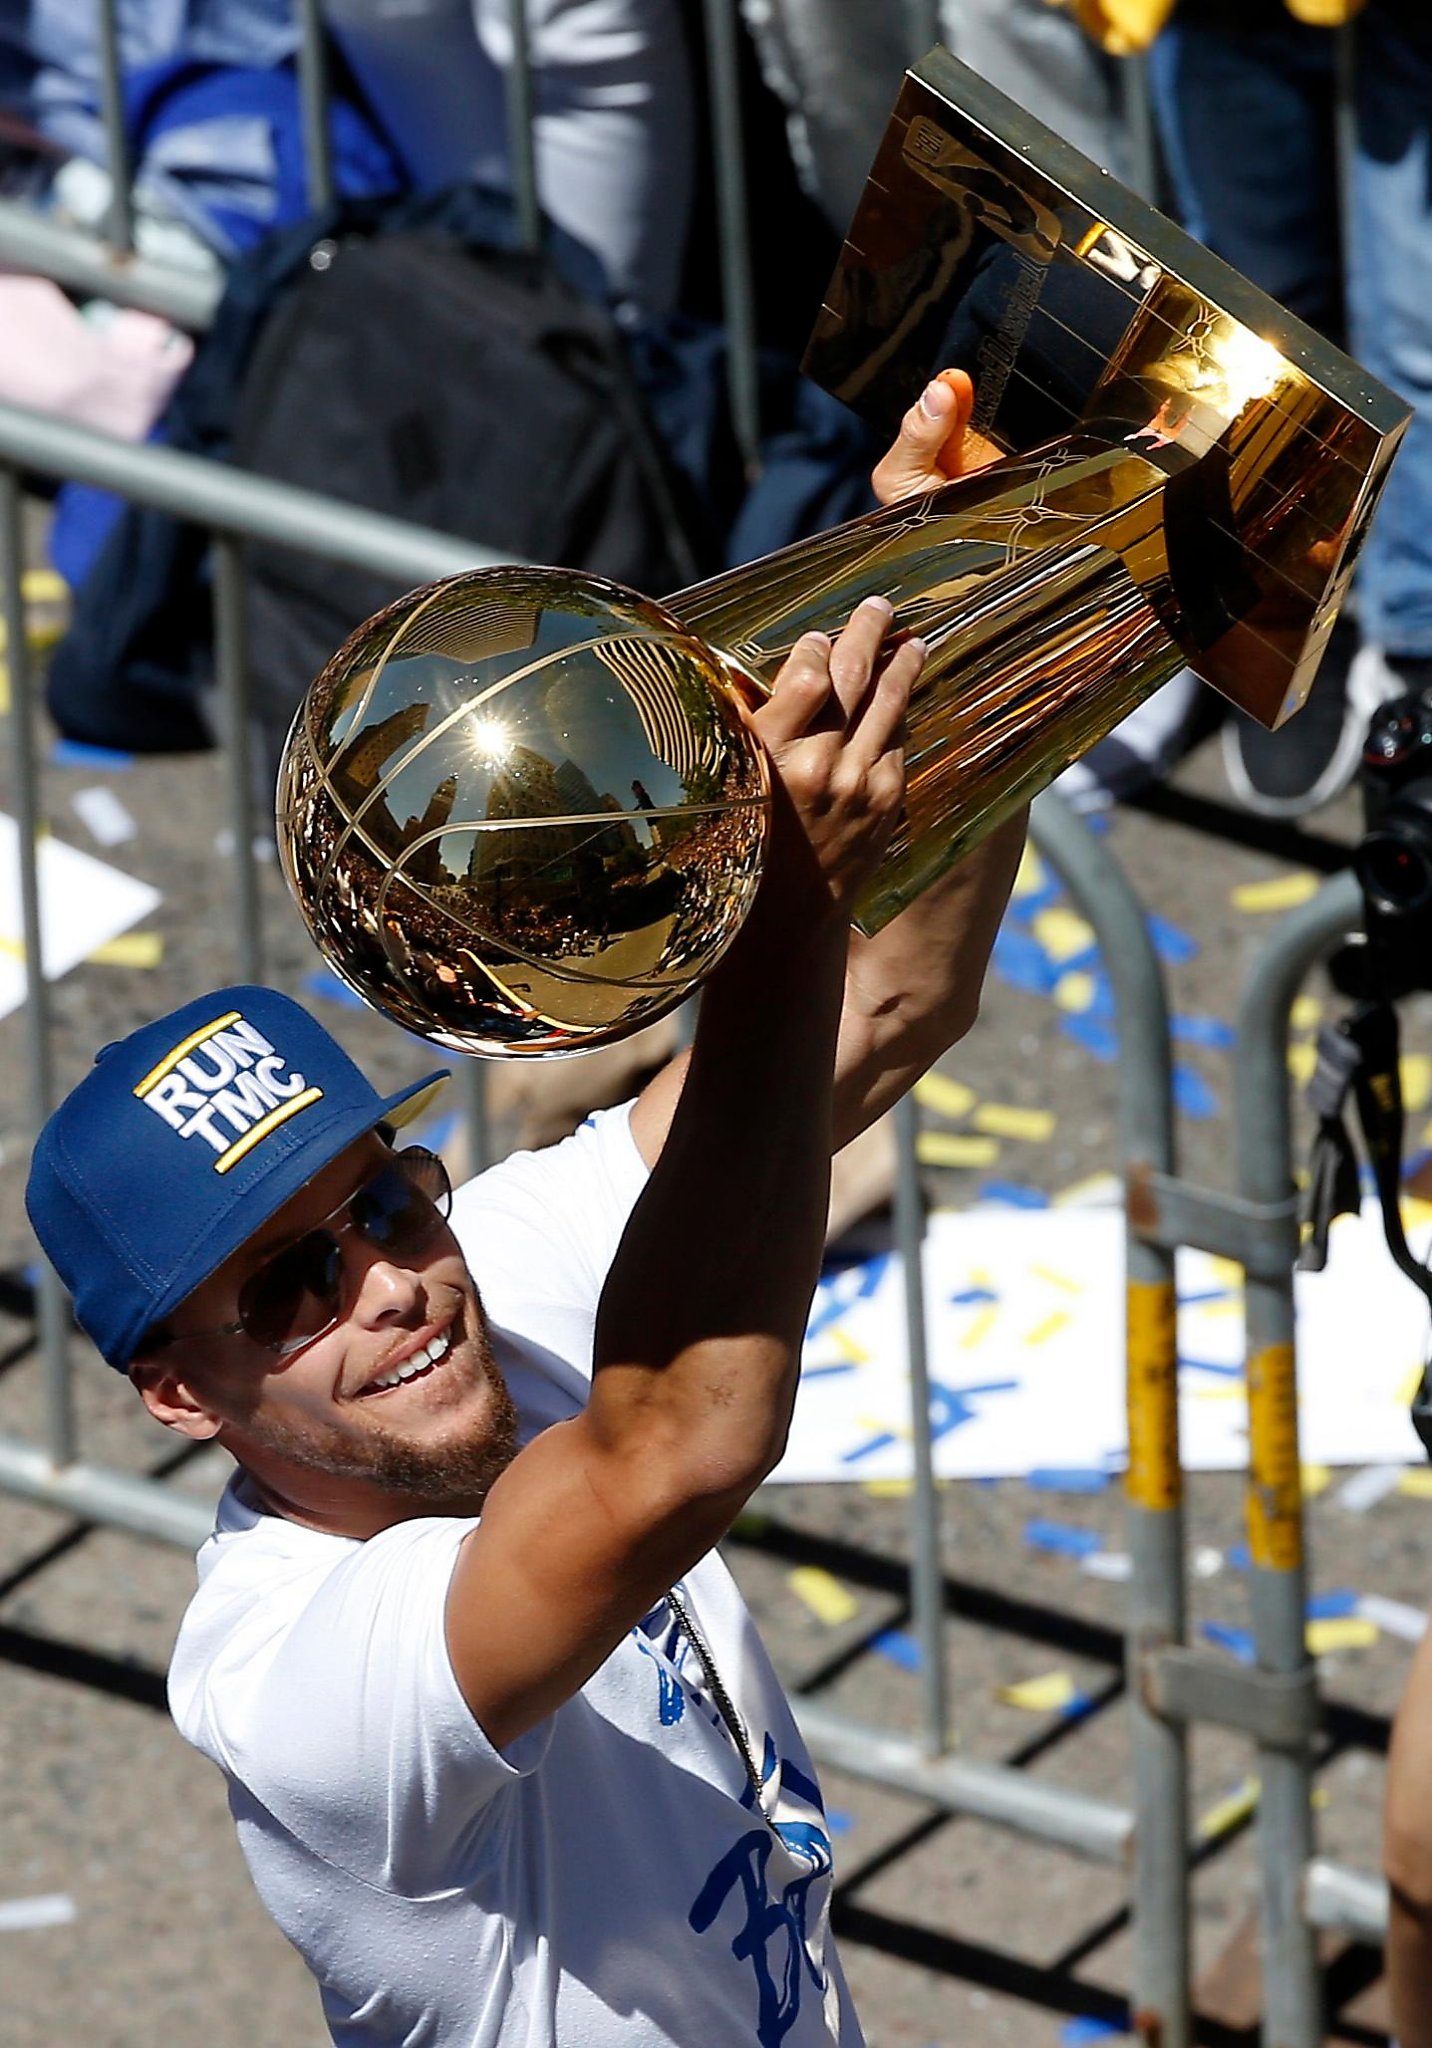 2019 NBA finals: Who gets a championship ring if the Warriors win?